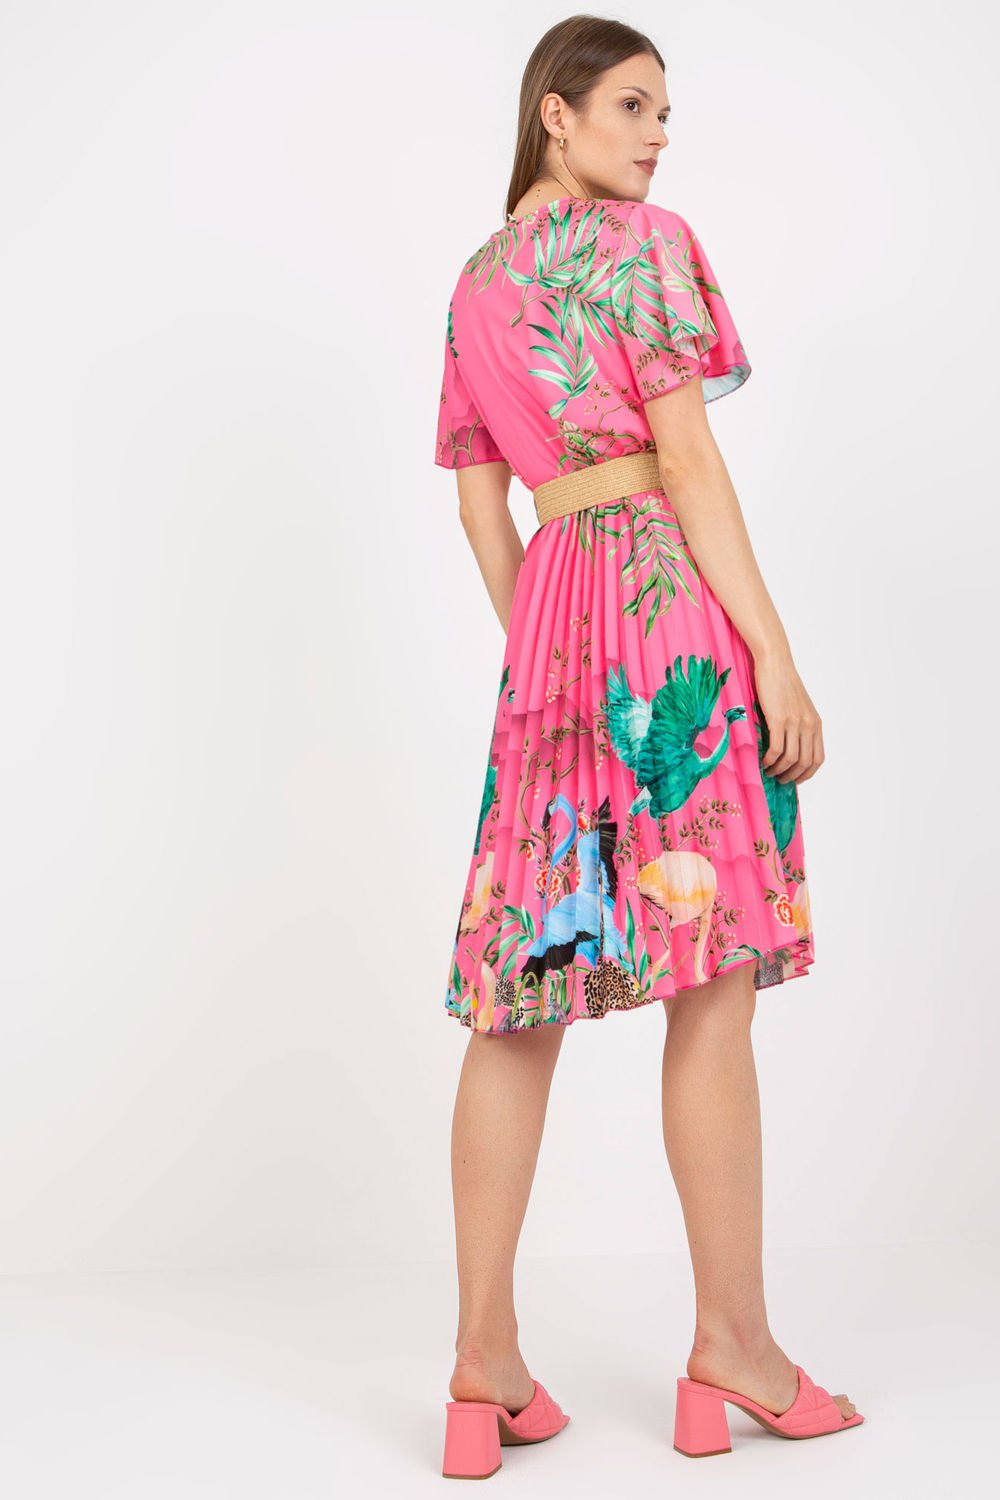 Floral Dress with Braided Belt